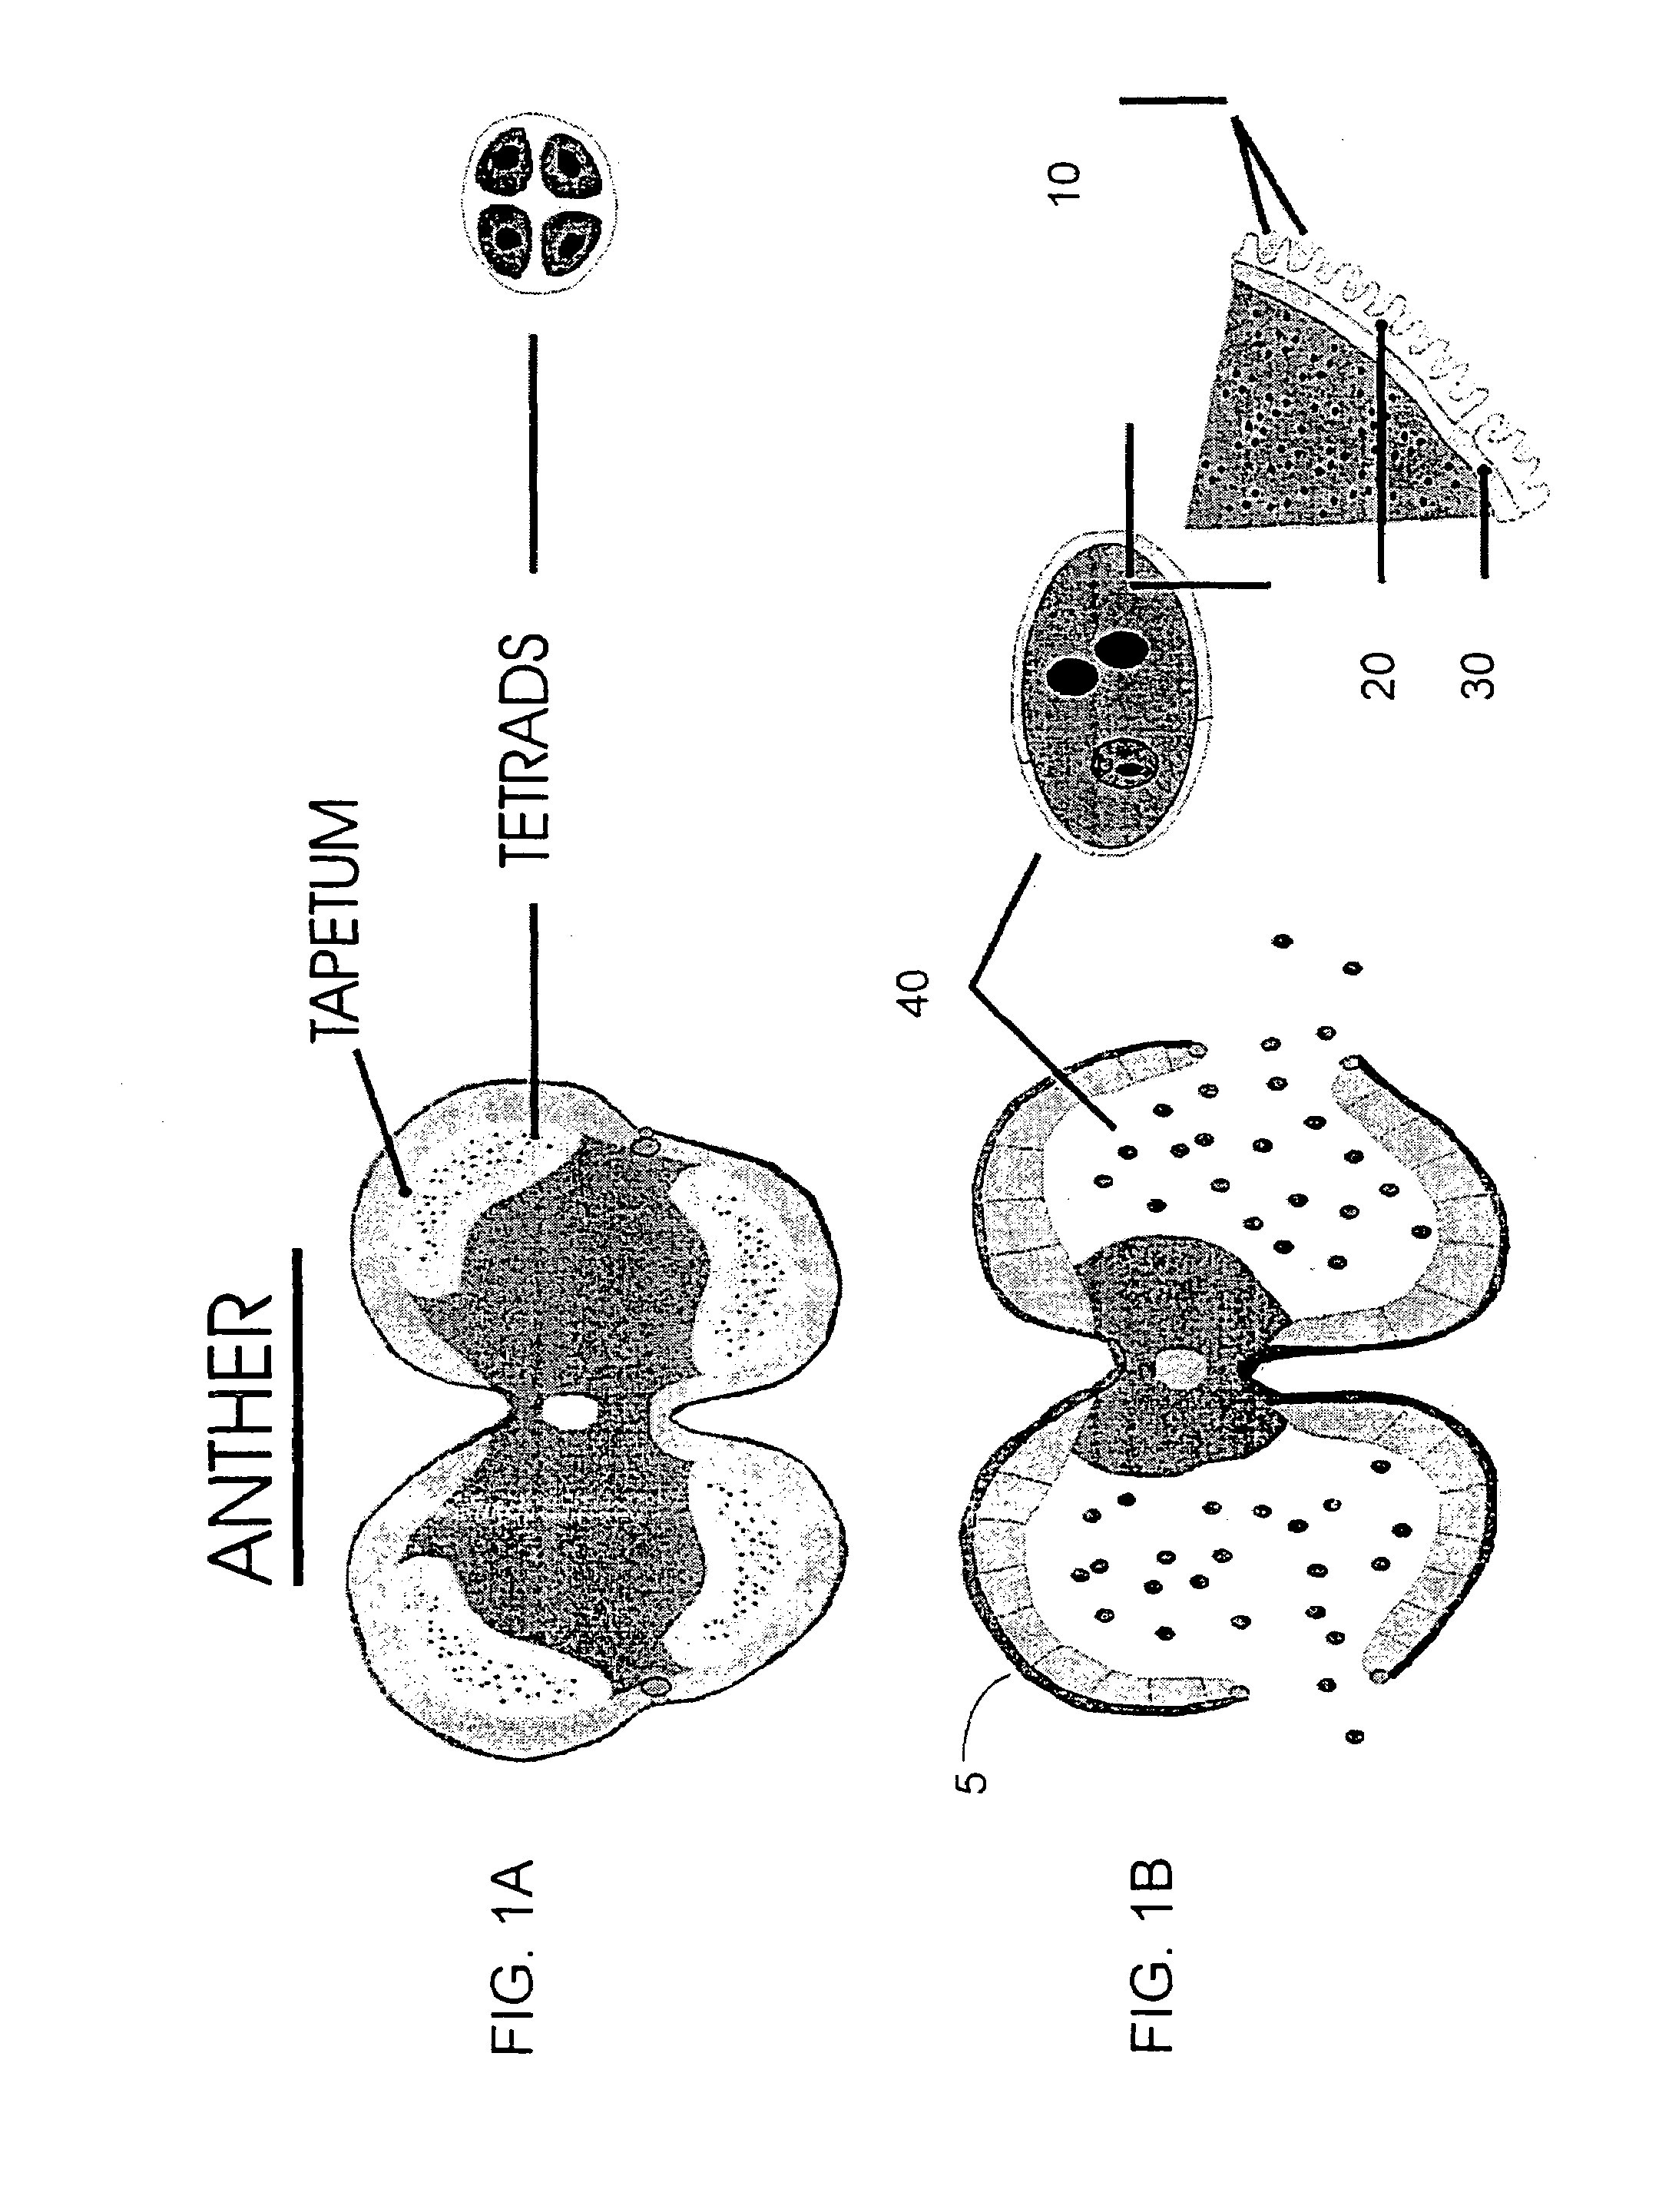 Modification of pollen coat protein composition